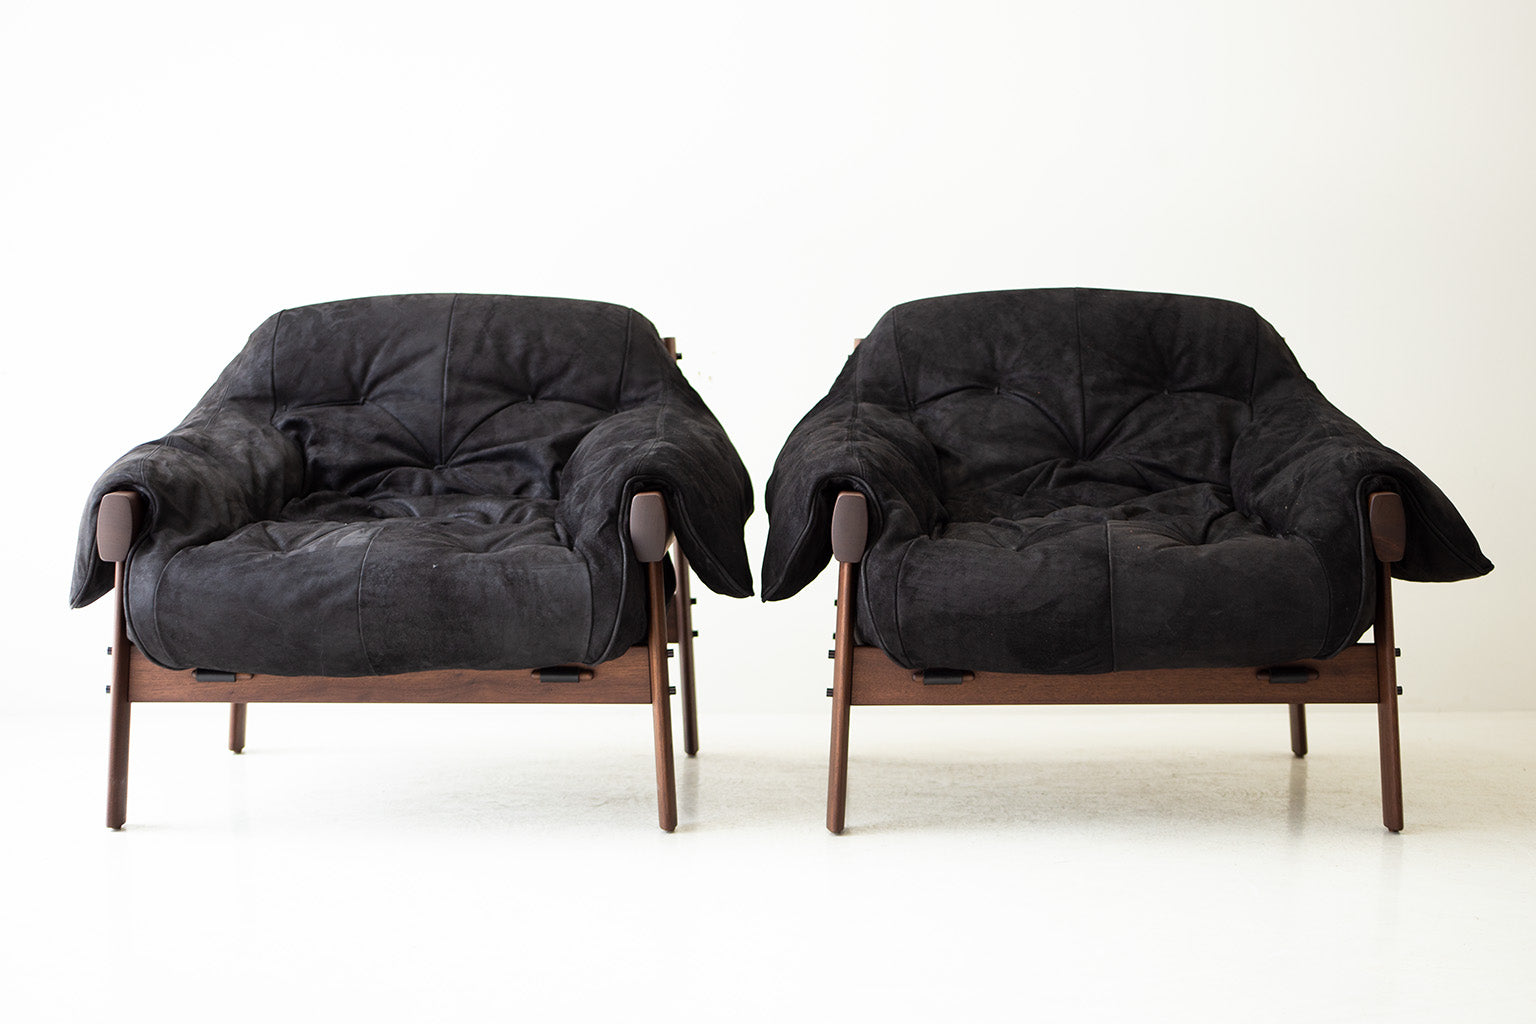      percival-modern-black-leather-lounge-chairs-mp-41-07